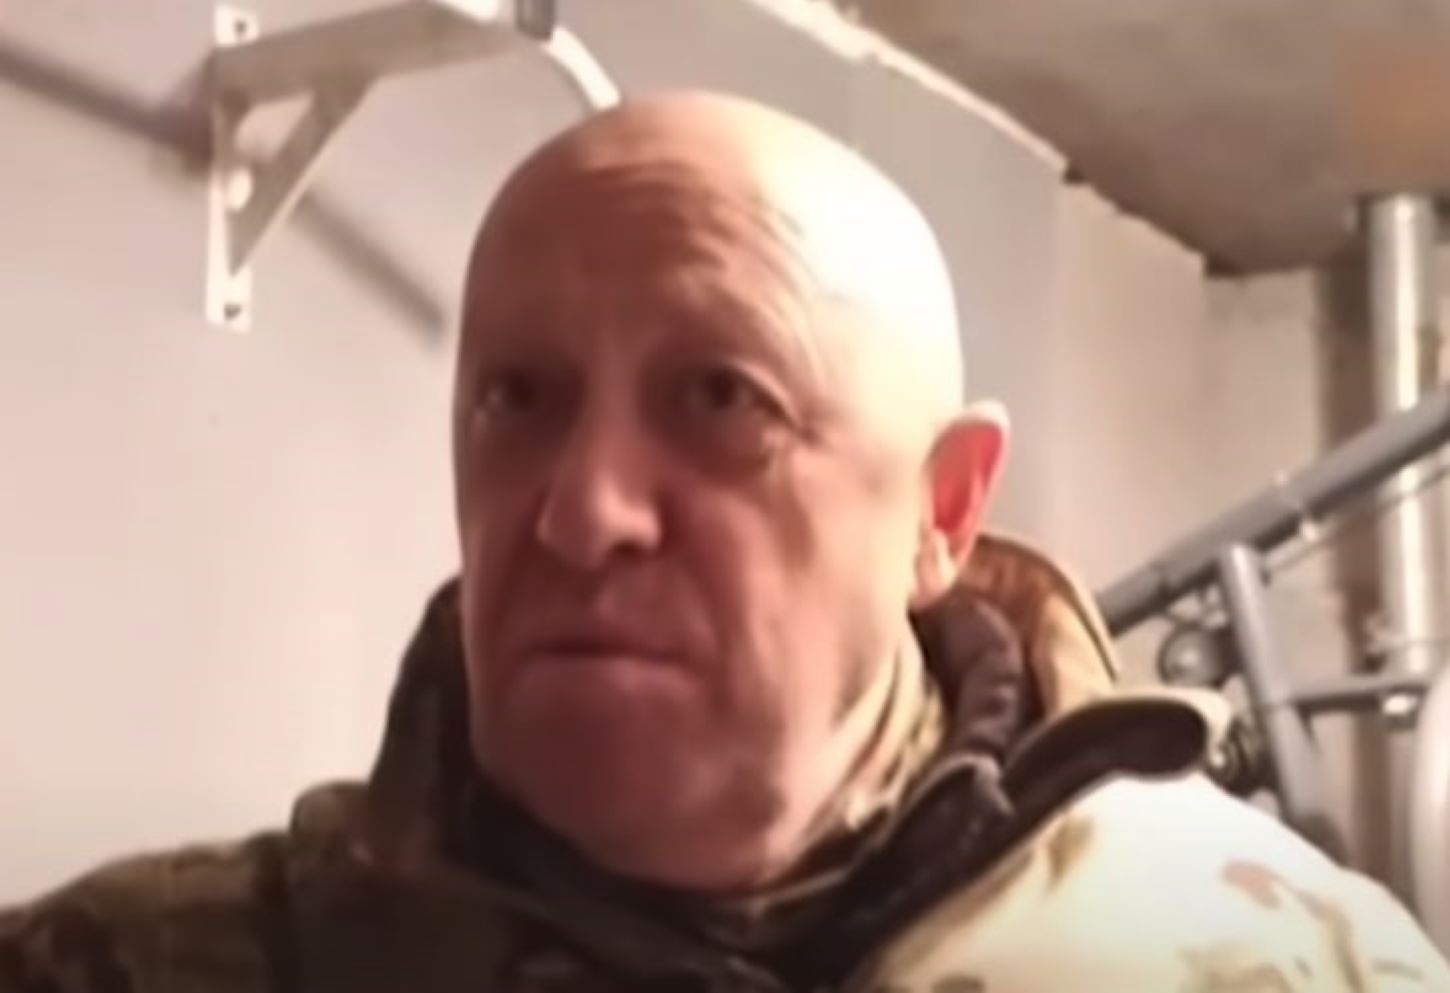 Russian mercenary warns of attack cutting off Russian forces